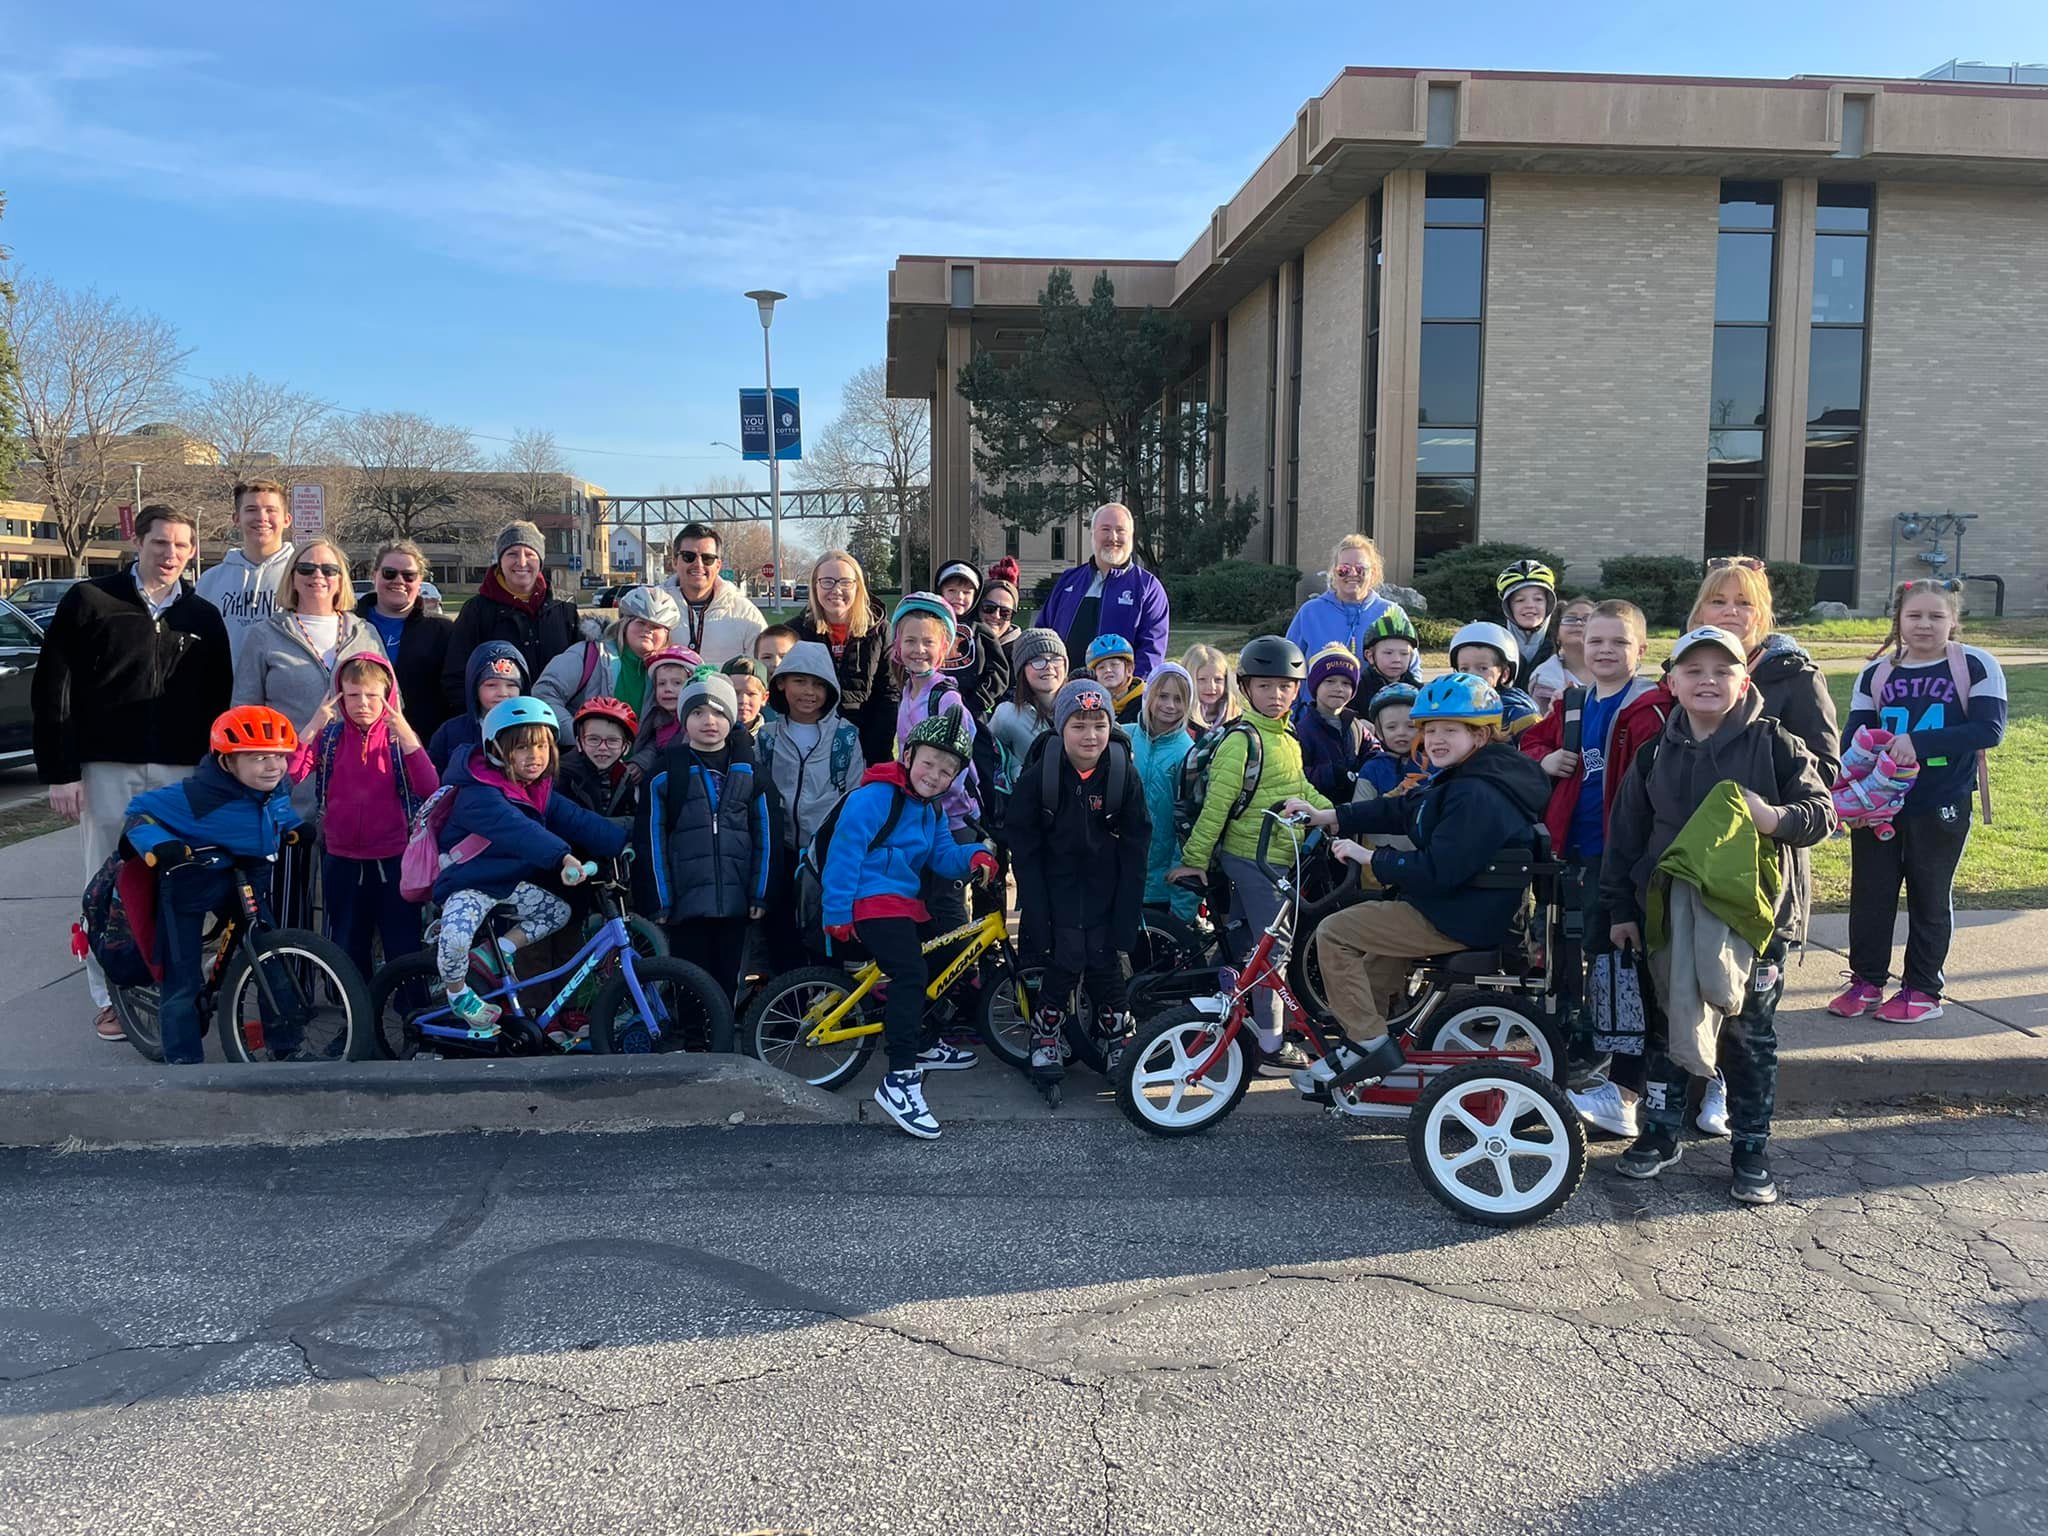 A group of students, educators, and families gathered for a photo with their bikes and scooters in Winona, Minnesota.